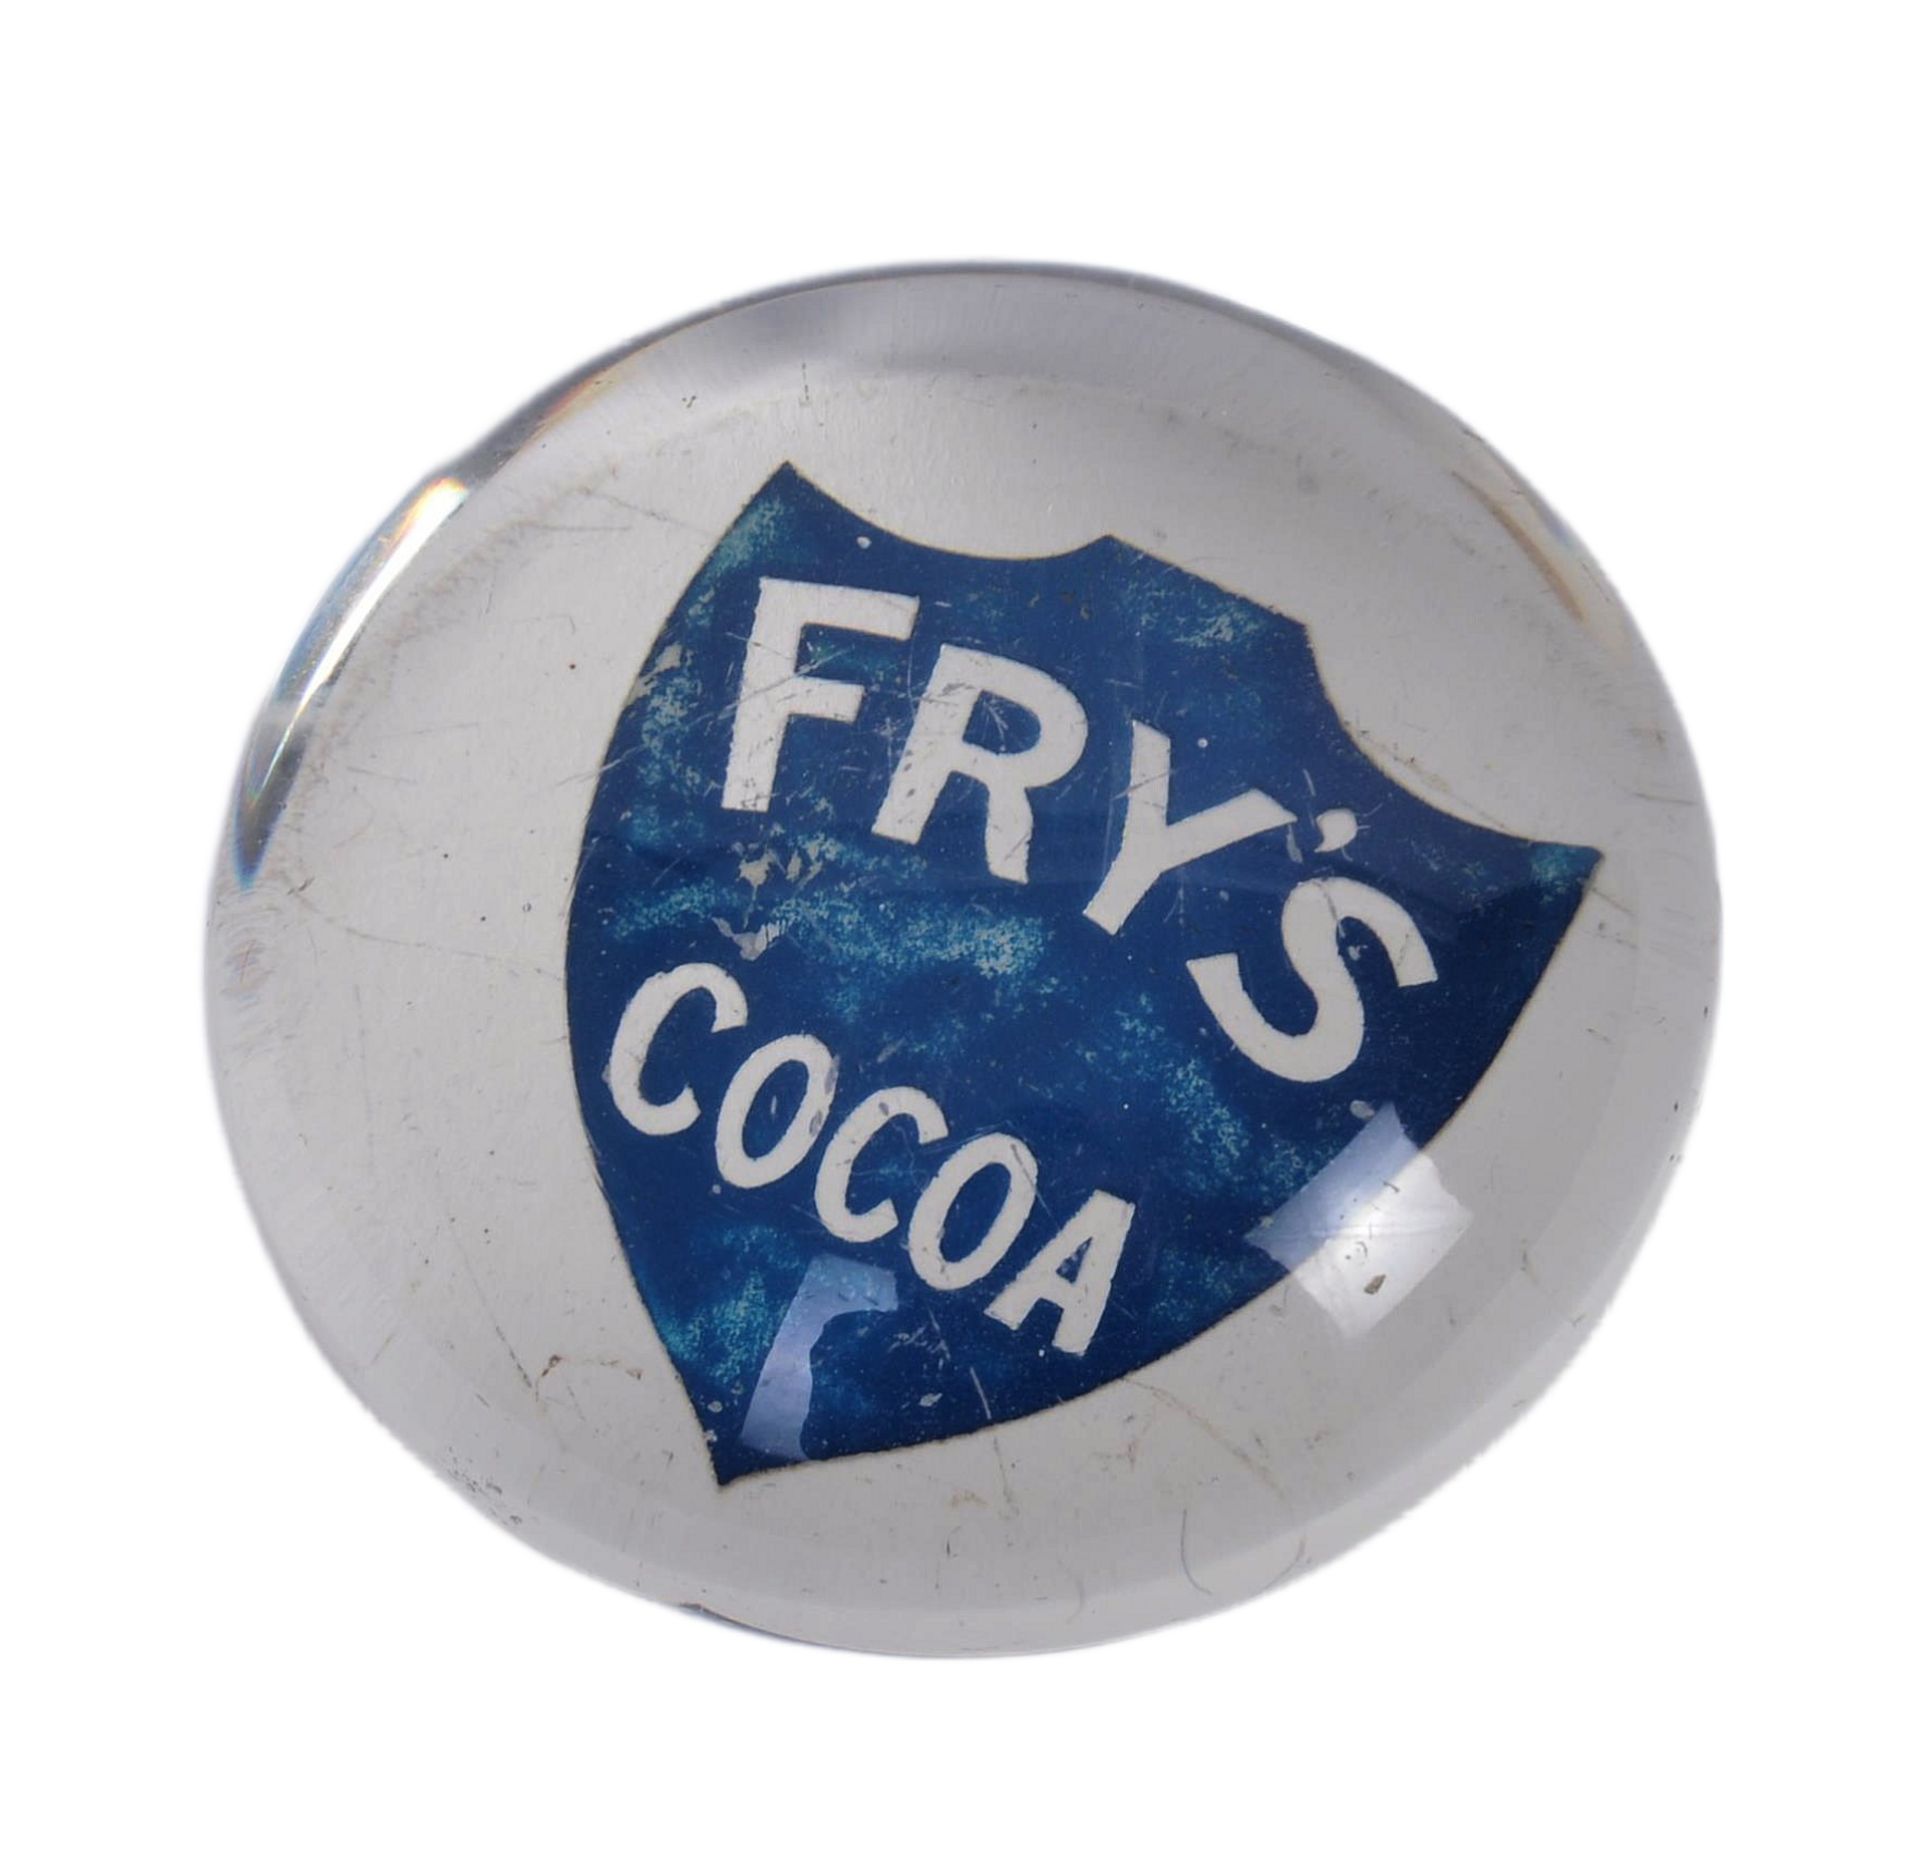 FRYS CHOCOLATE - DESK TOP ADVERTISING PAPERWEIGHT